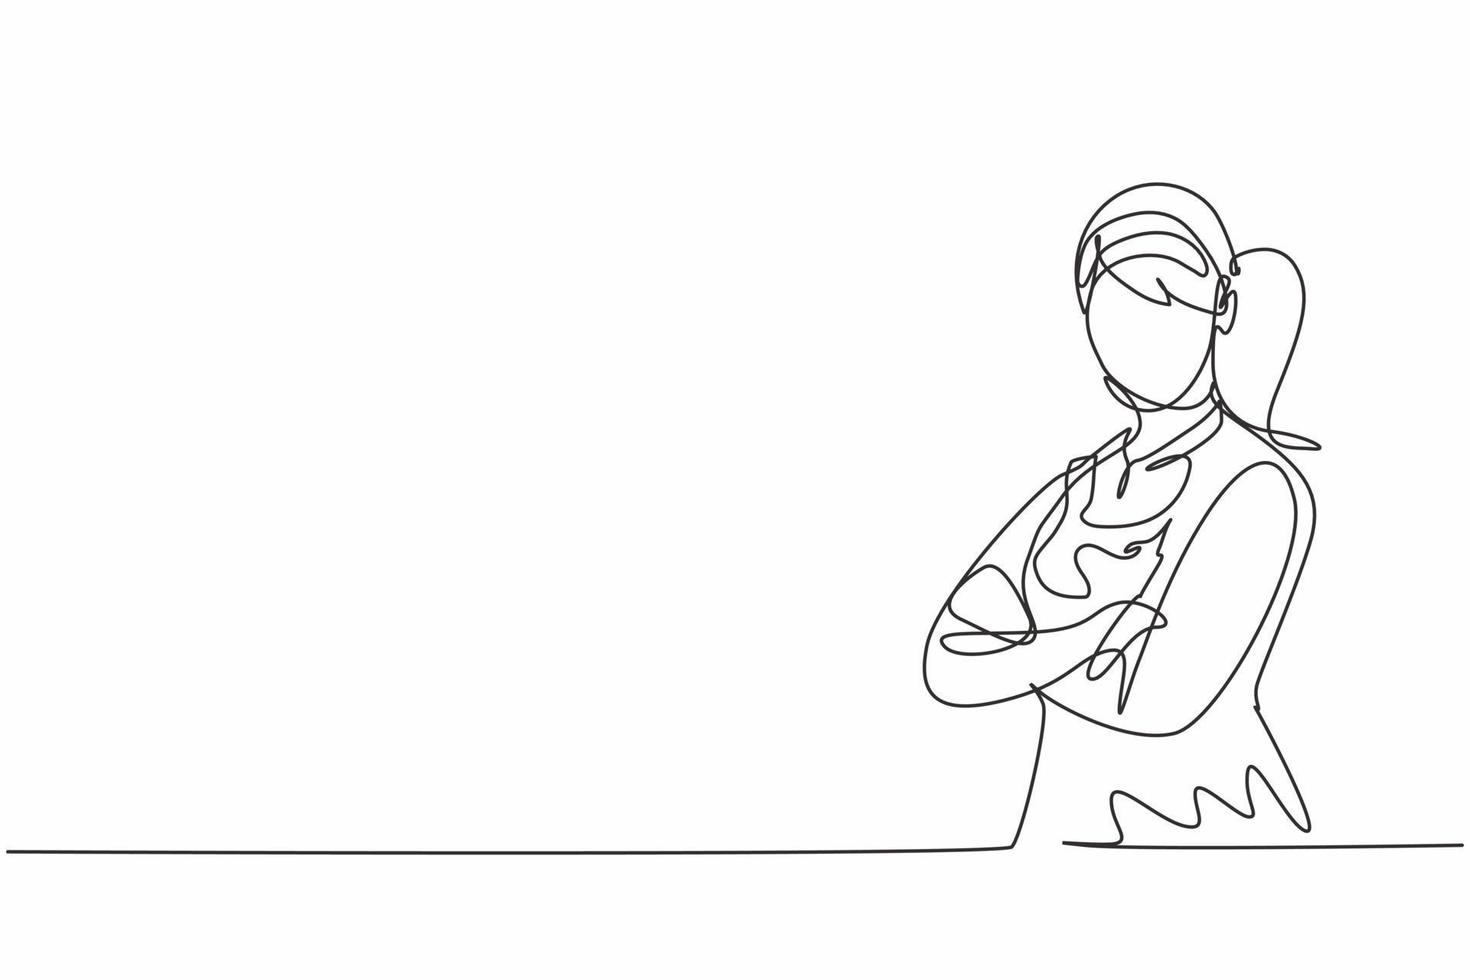 Single one line drawing of young female hotel maid pose cross arms on chest. Professional work profession and occupation minimal concept. Continuous line draw design graphic vector illustration